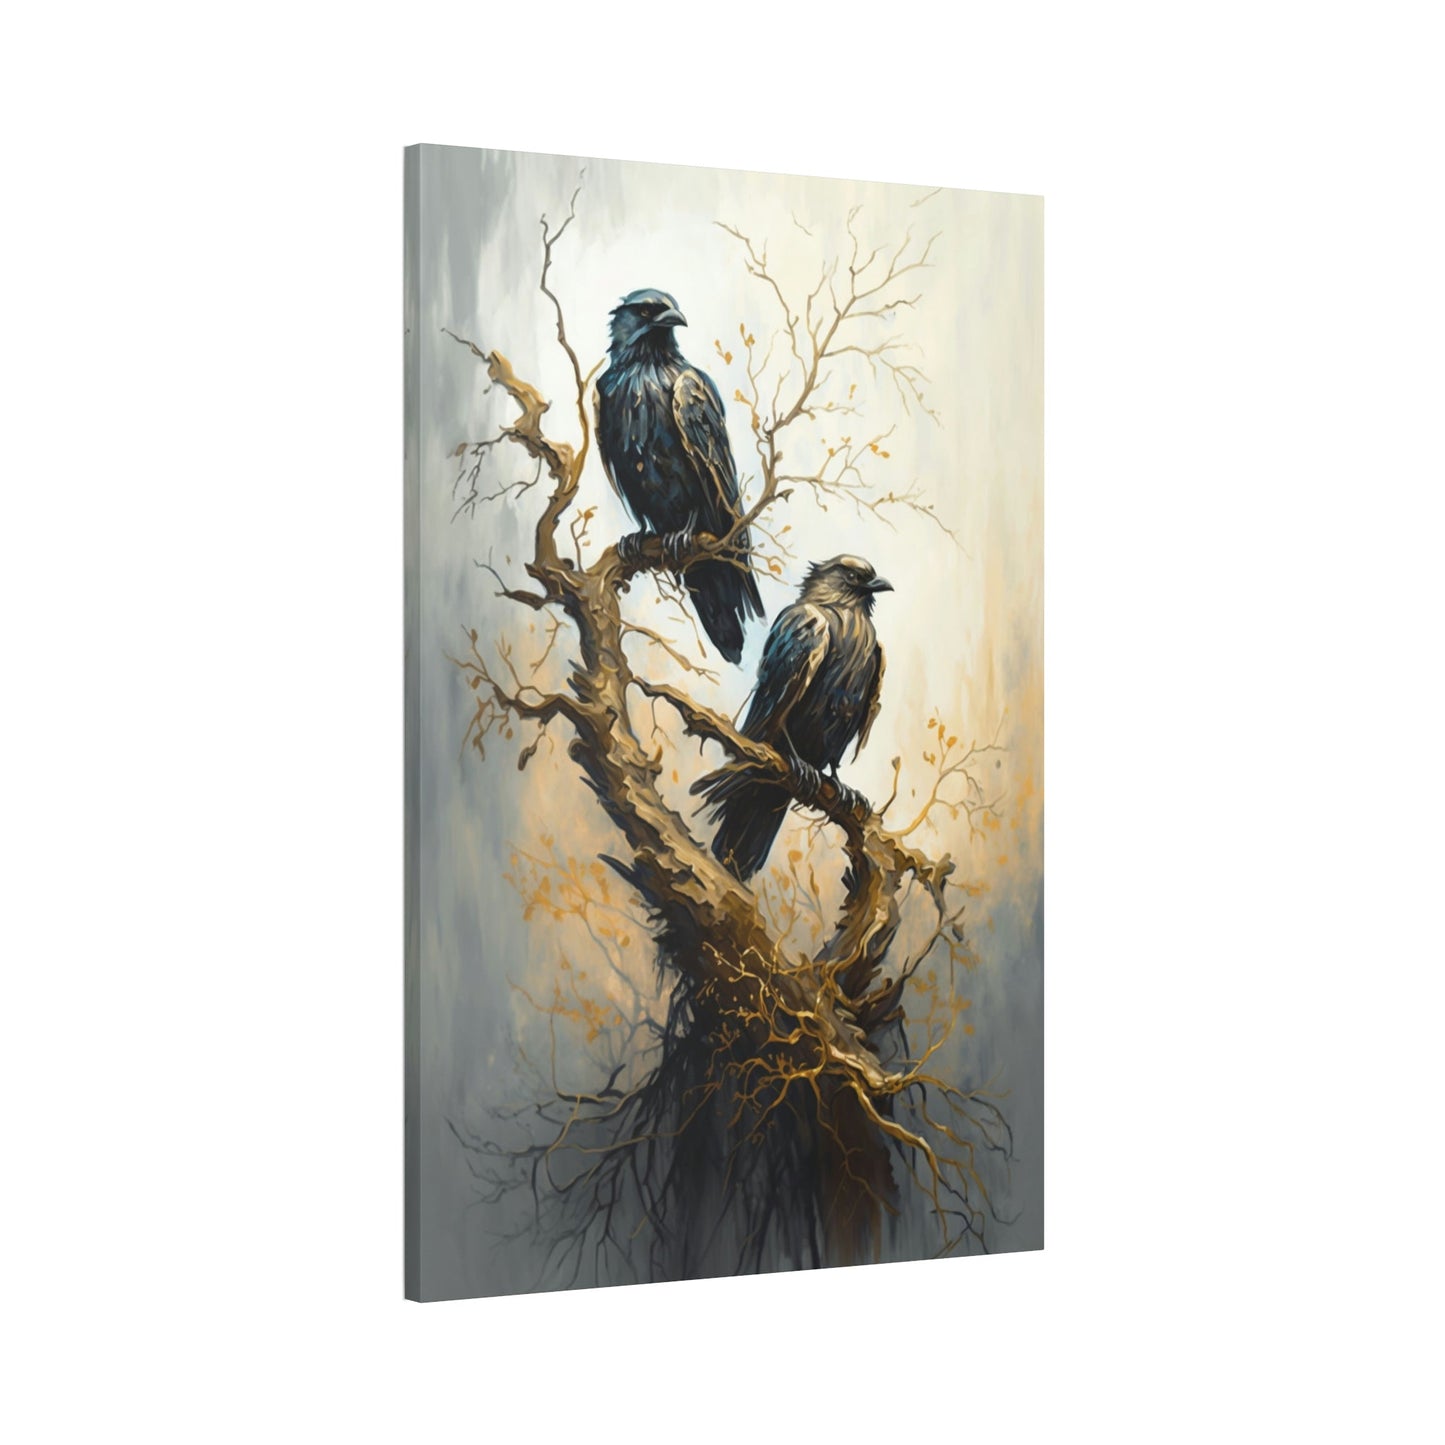 A Gathering of Ravens: A Mystical Forest Scene